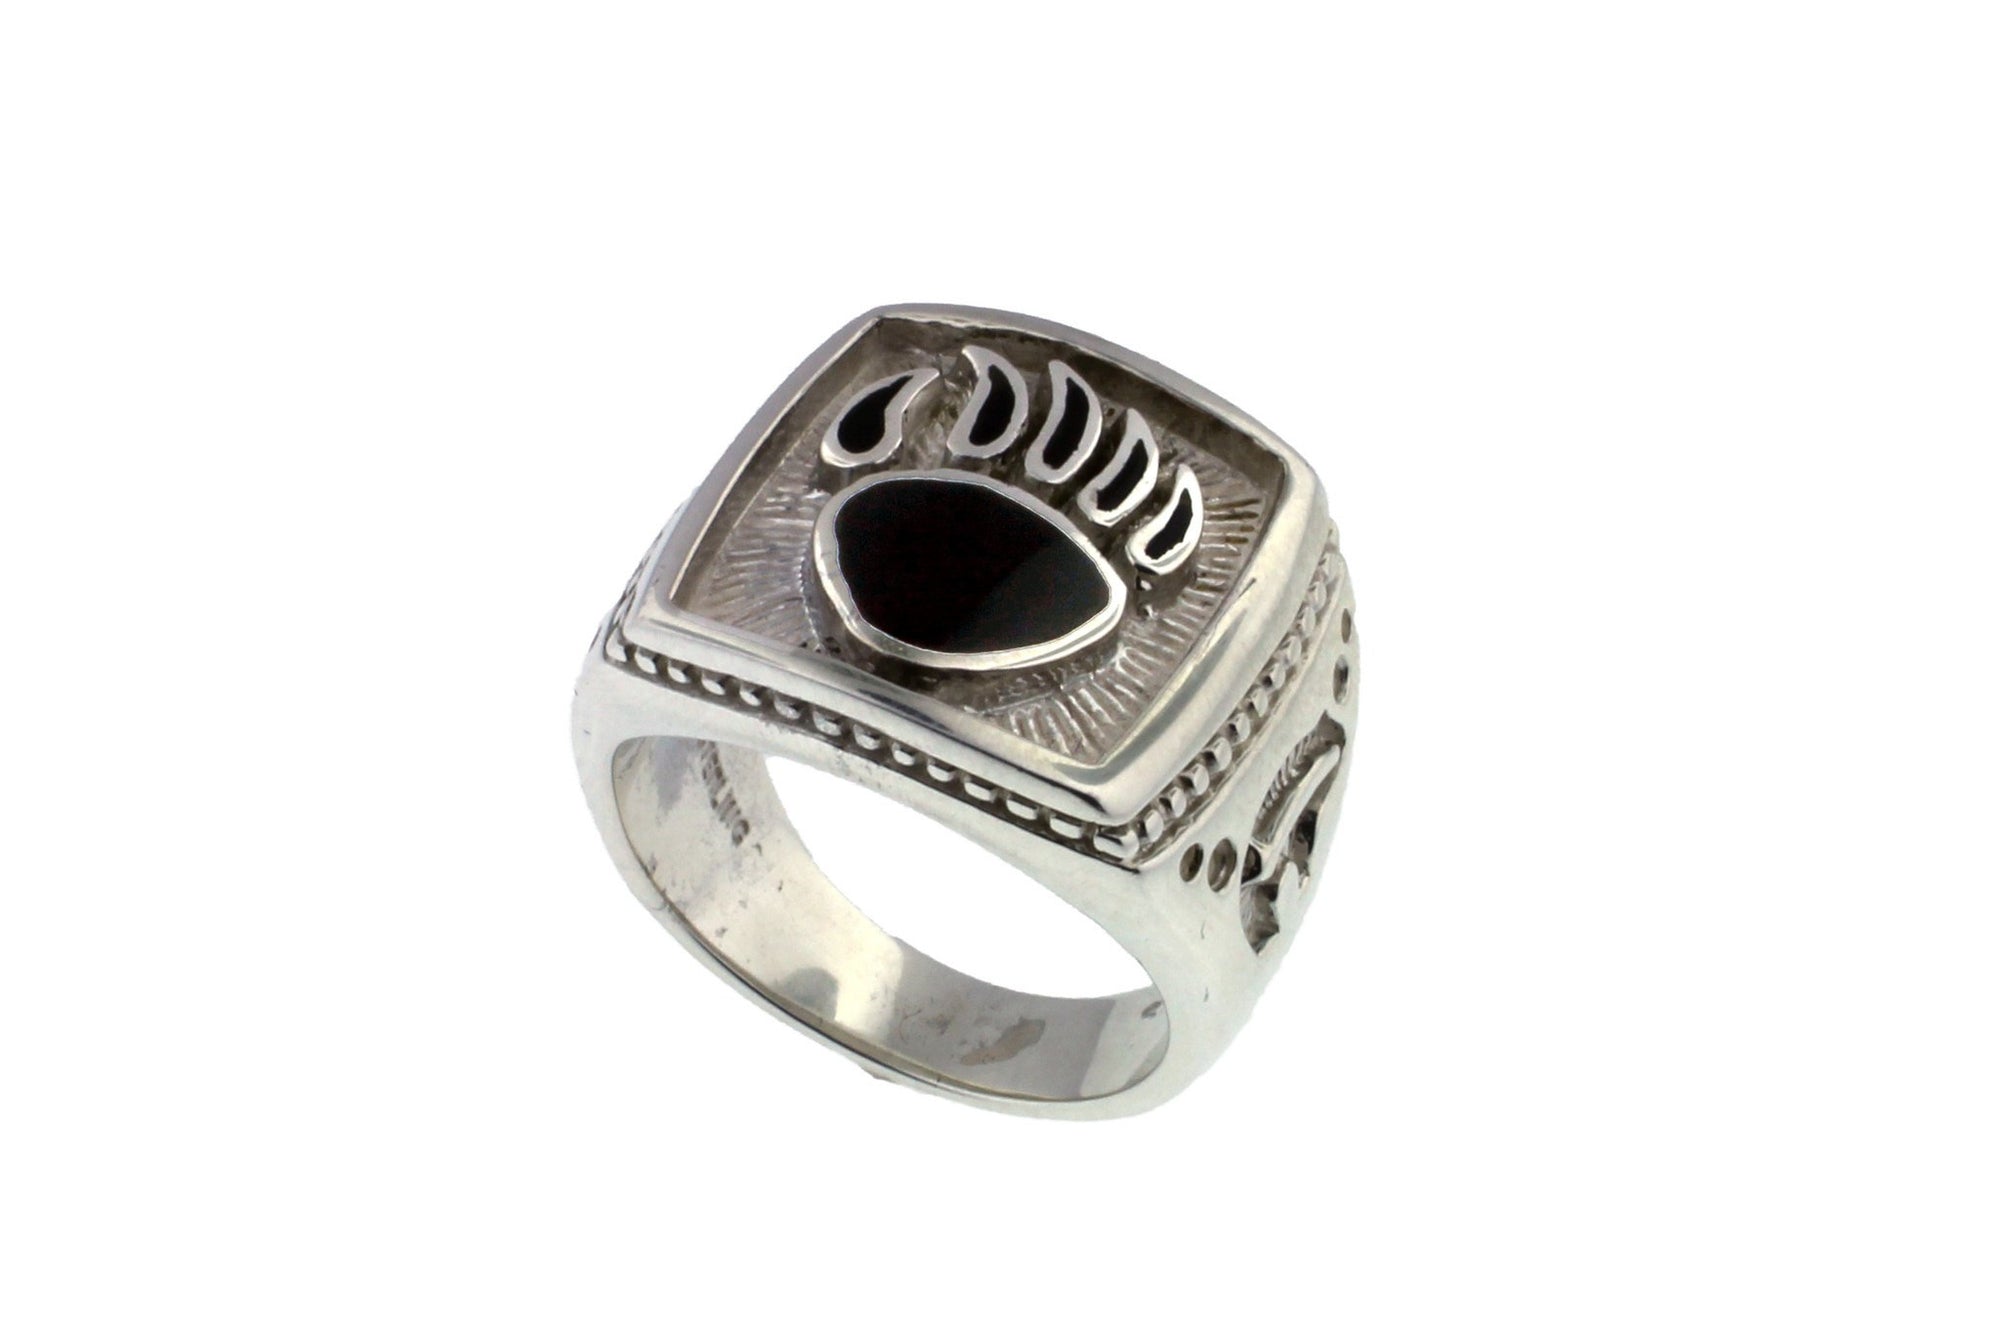 Bear Paw Silver Men's Ring by David Rosales - Native American Jewelry